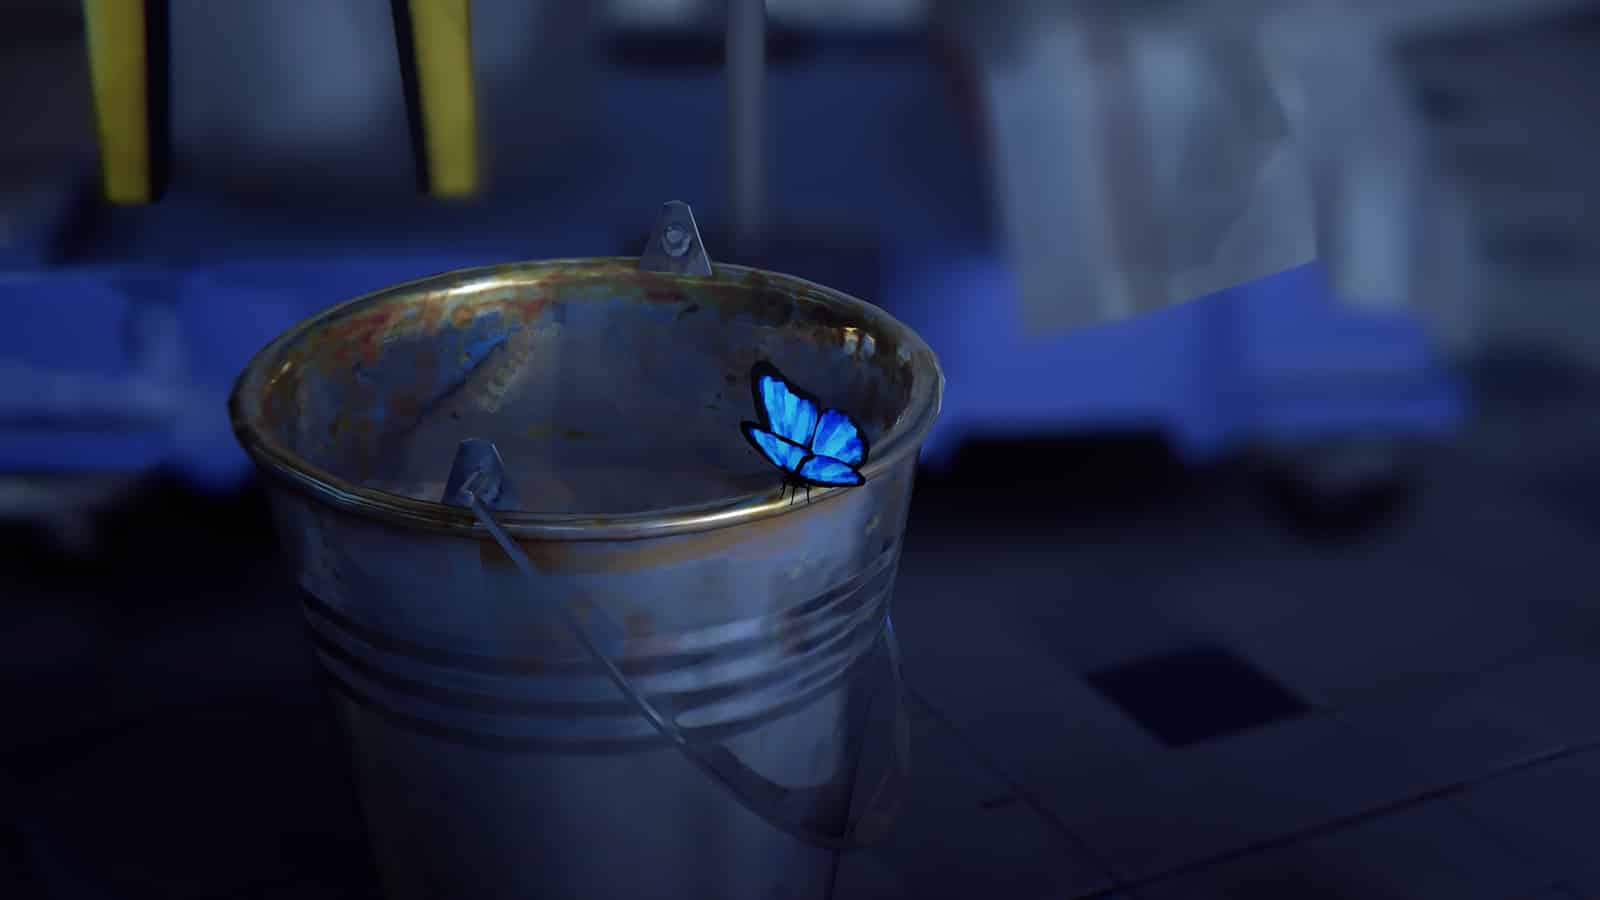 An image of the blue Butterfly resting on a bucket